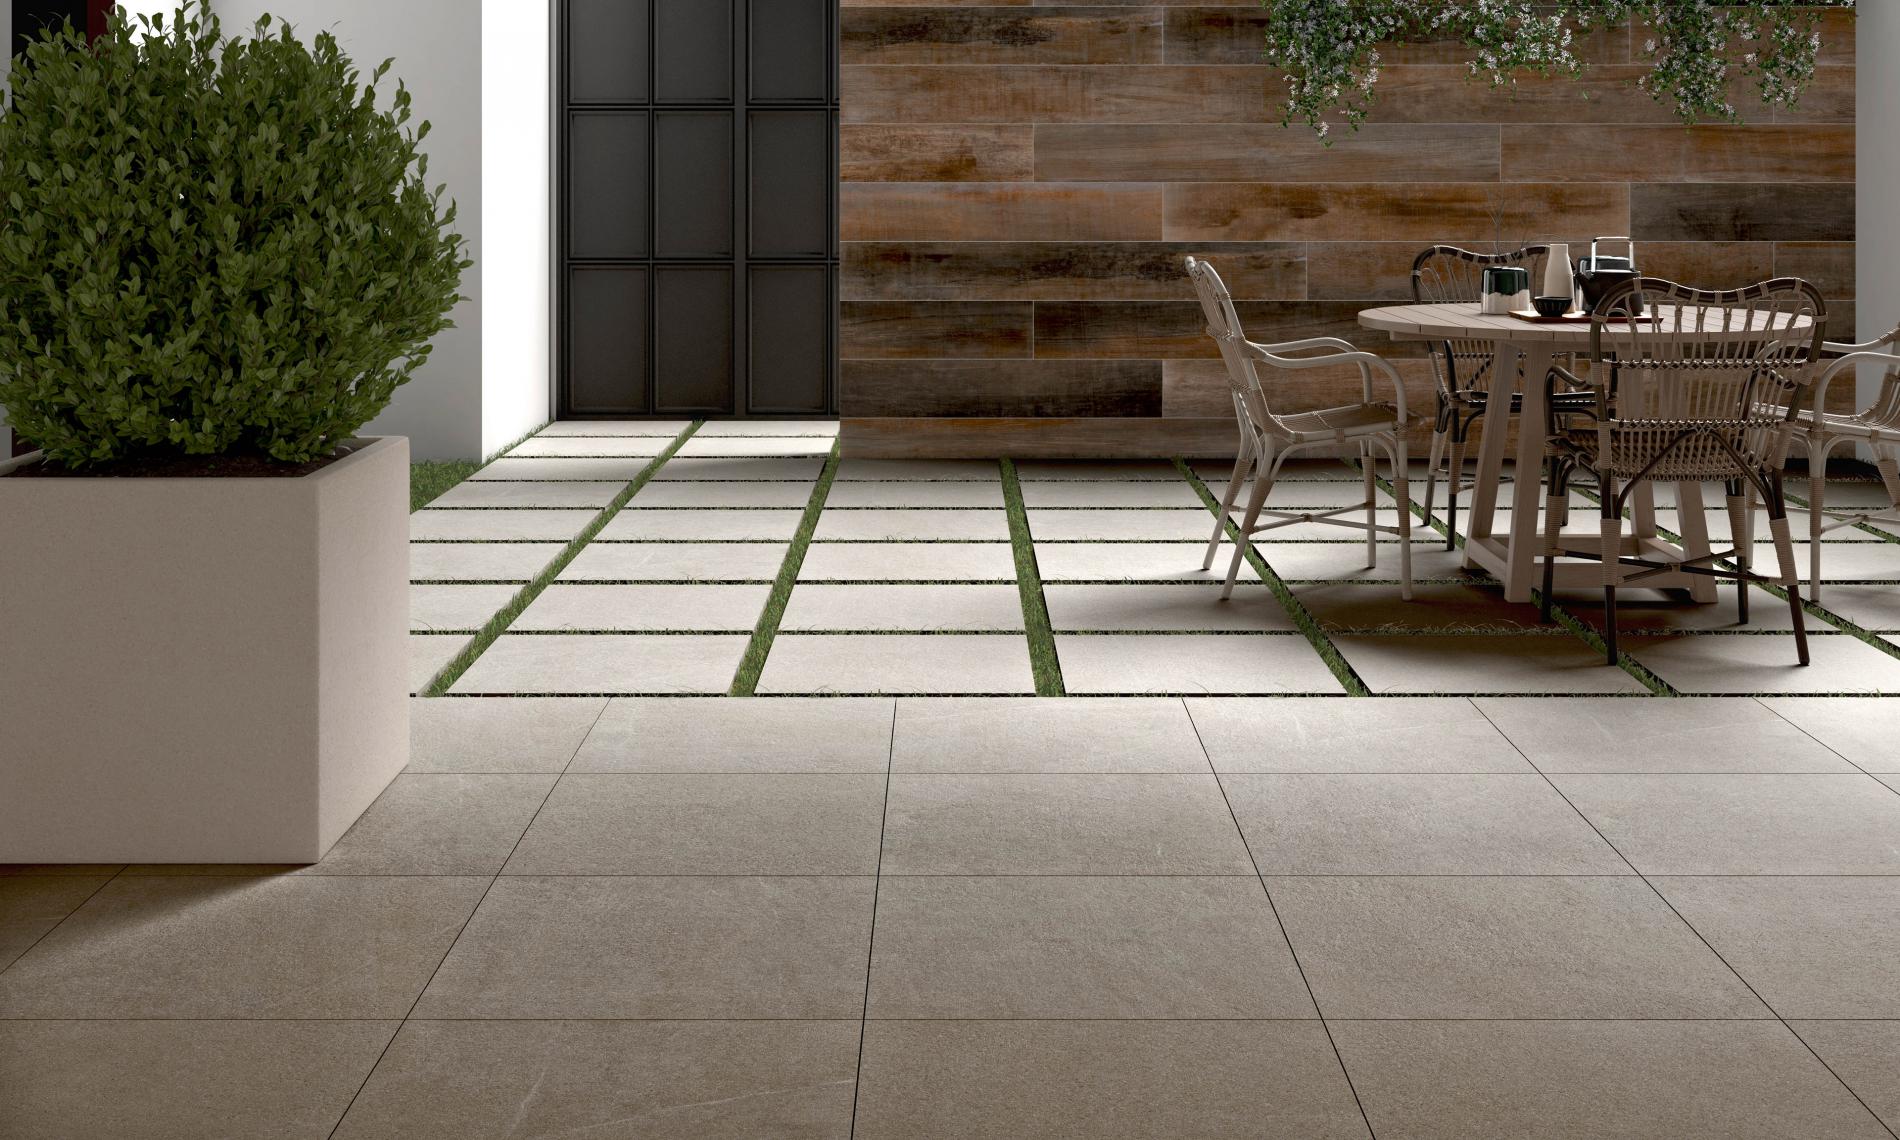 Picture for category OUTDOOR TILES